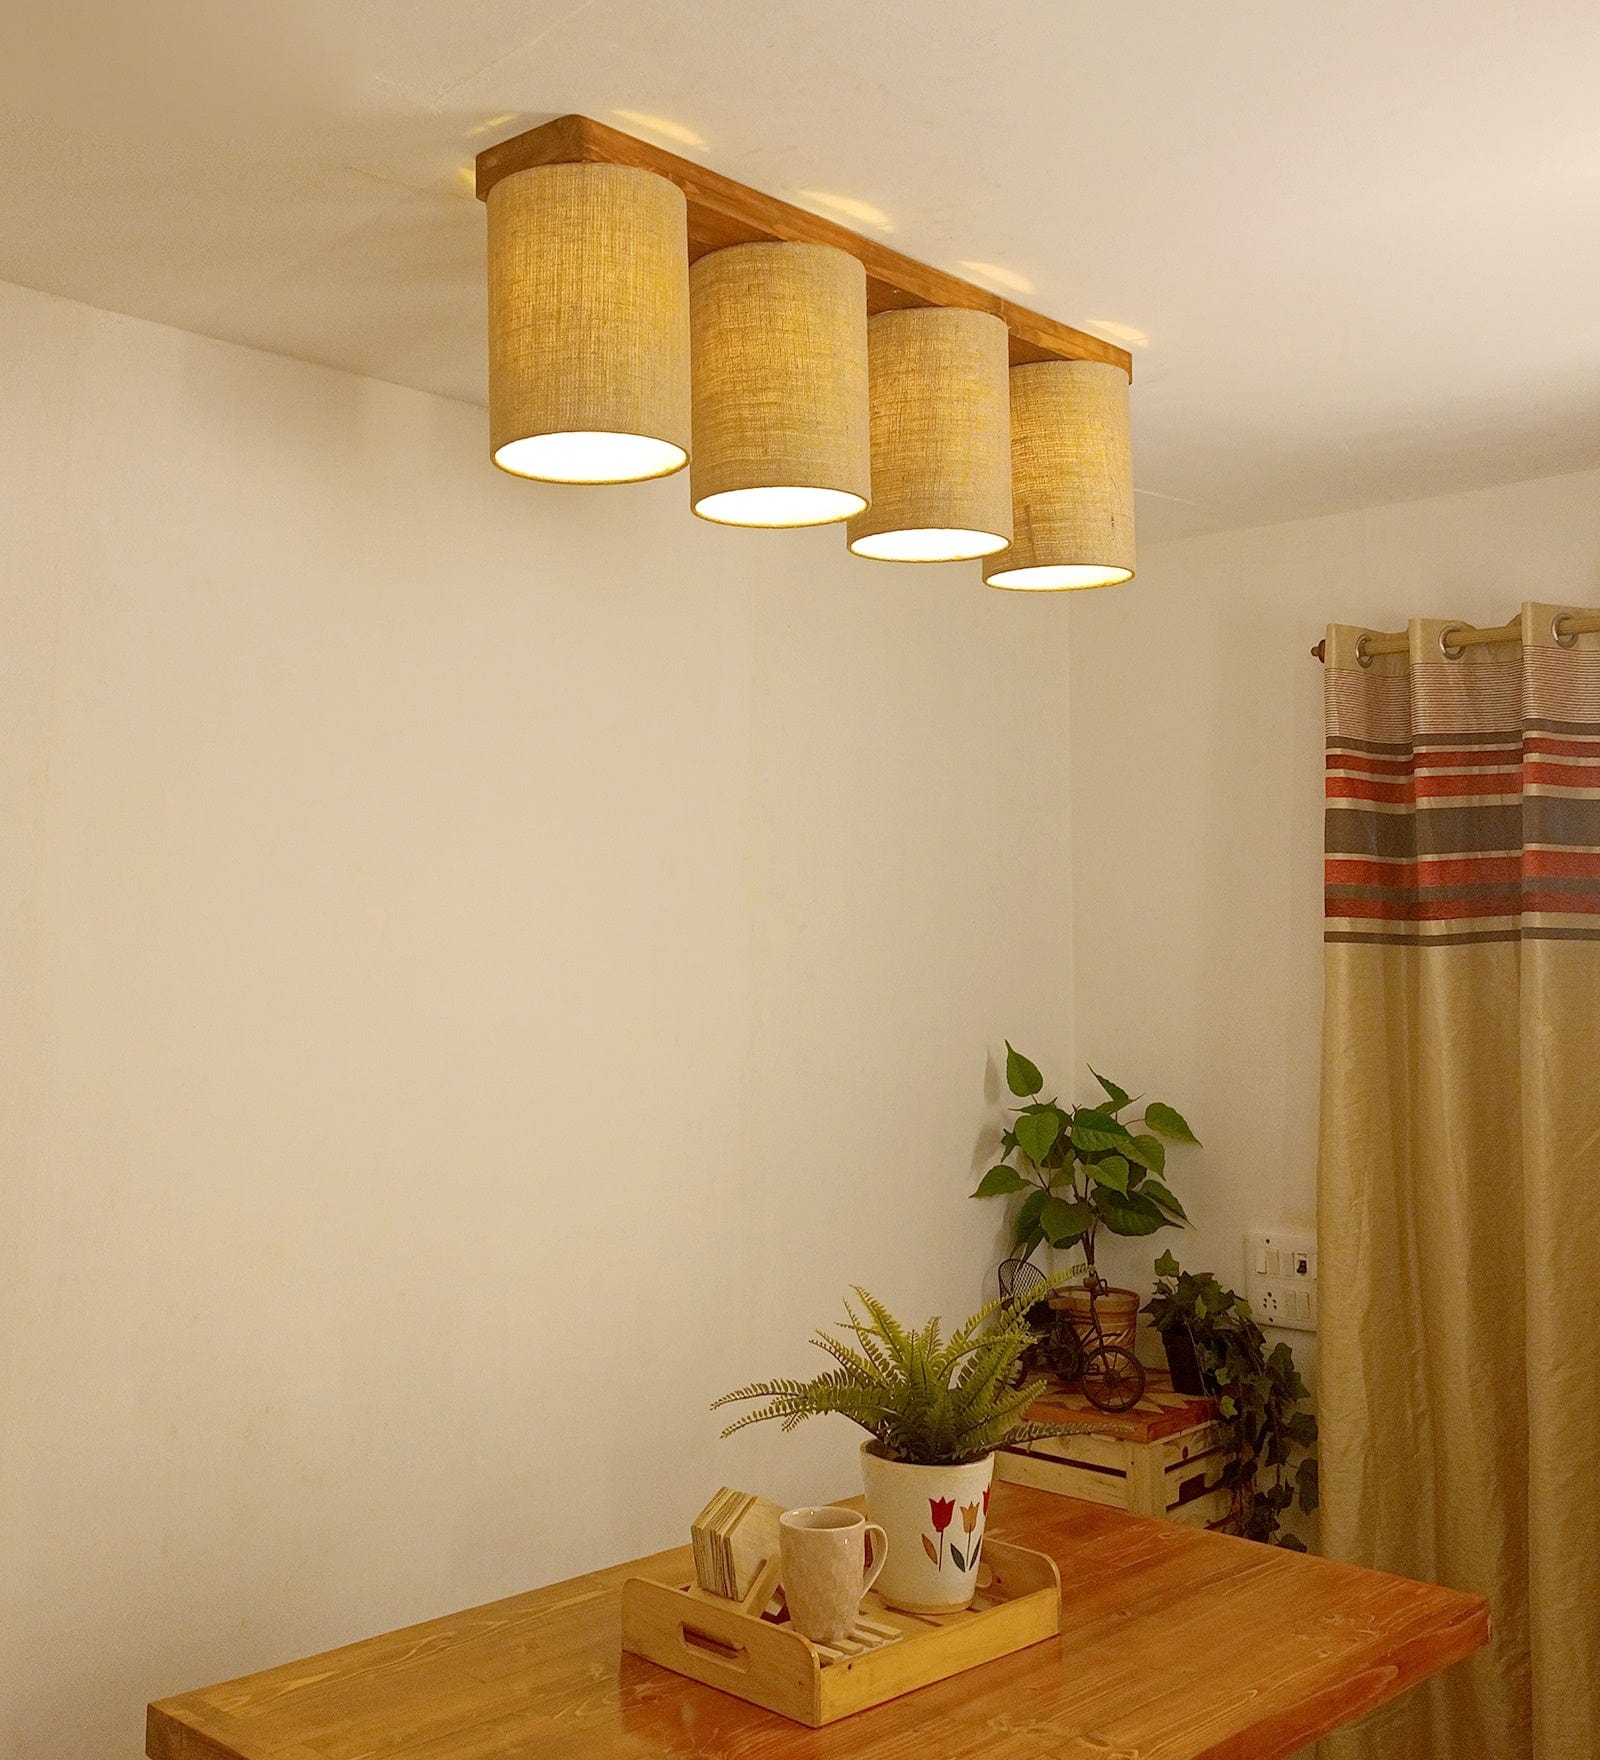 Elementary Brown Wooden 4 Series Ceiling Lamp (BULB NOT INCLUDED)